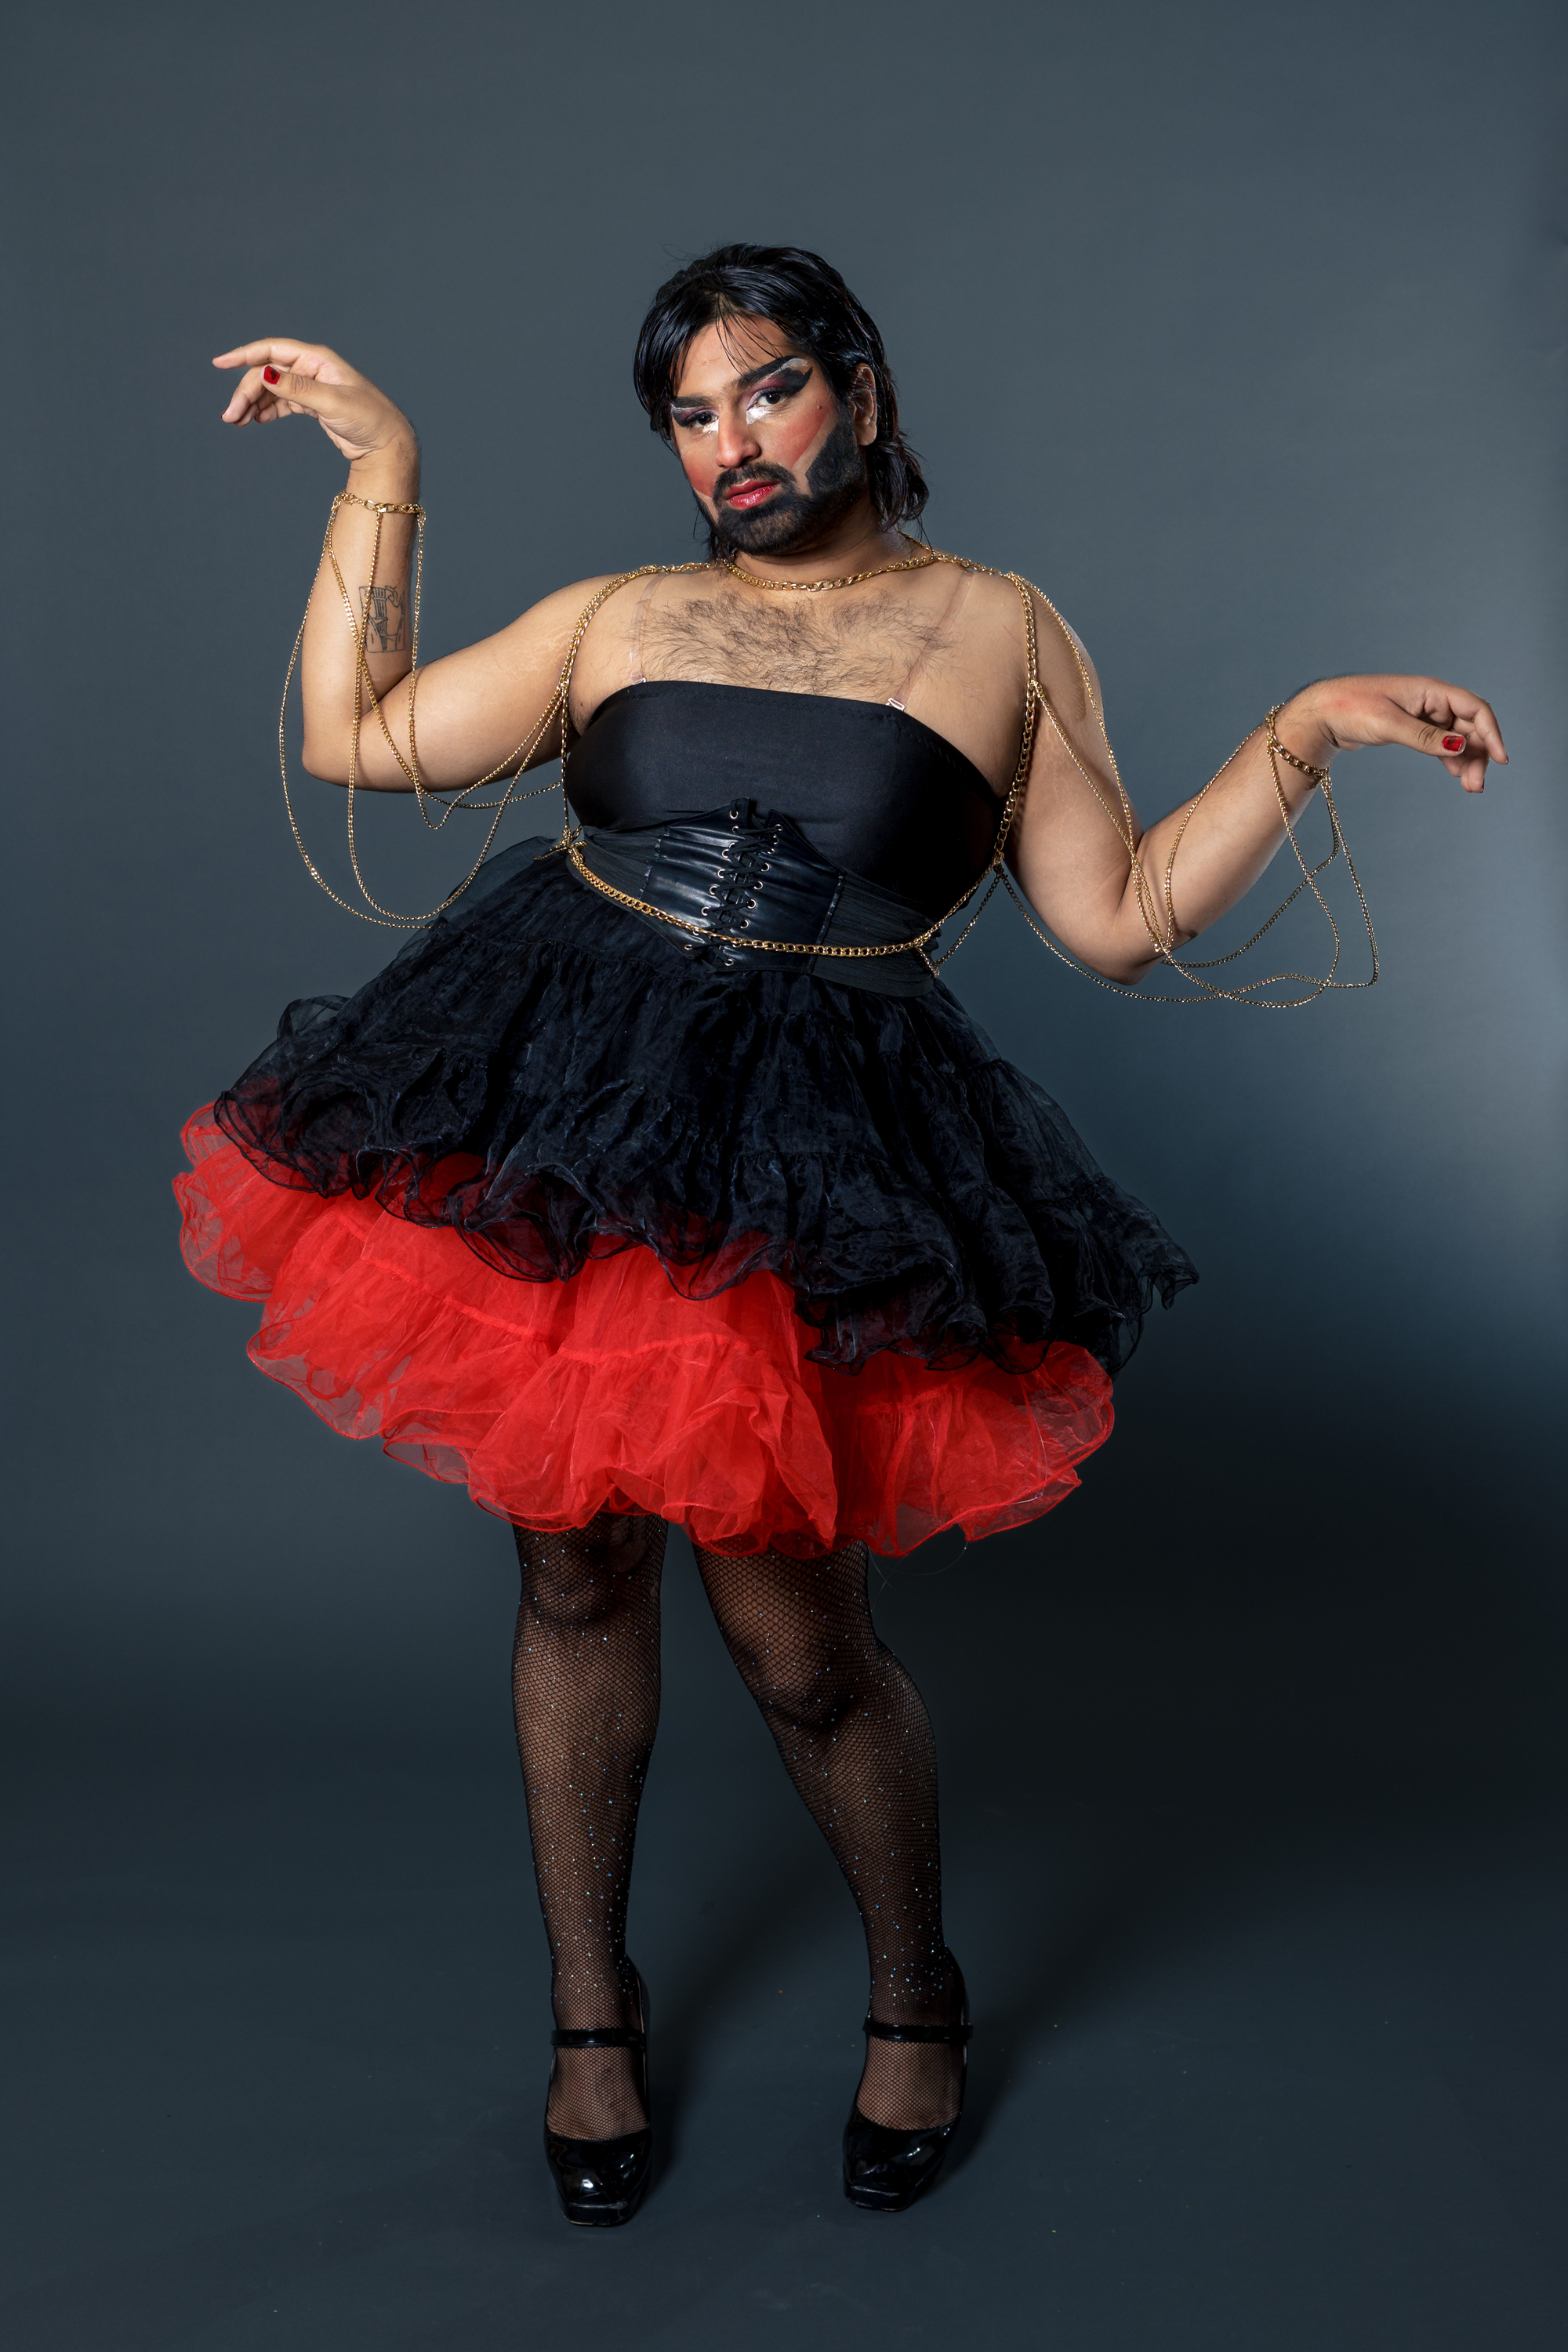 A drag queen poses in a black dress.